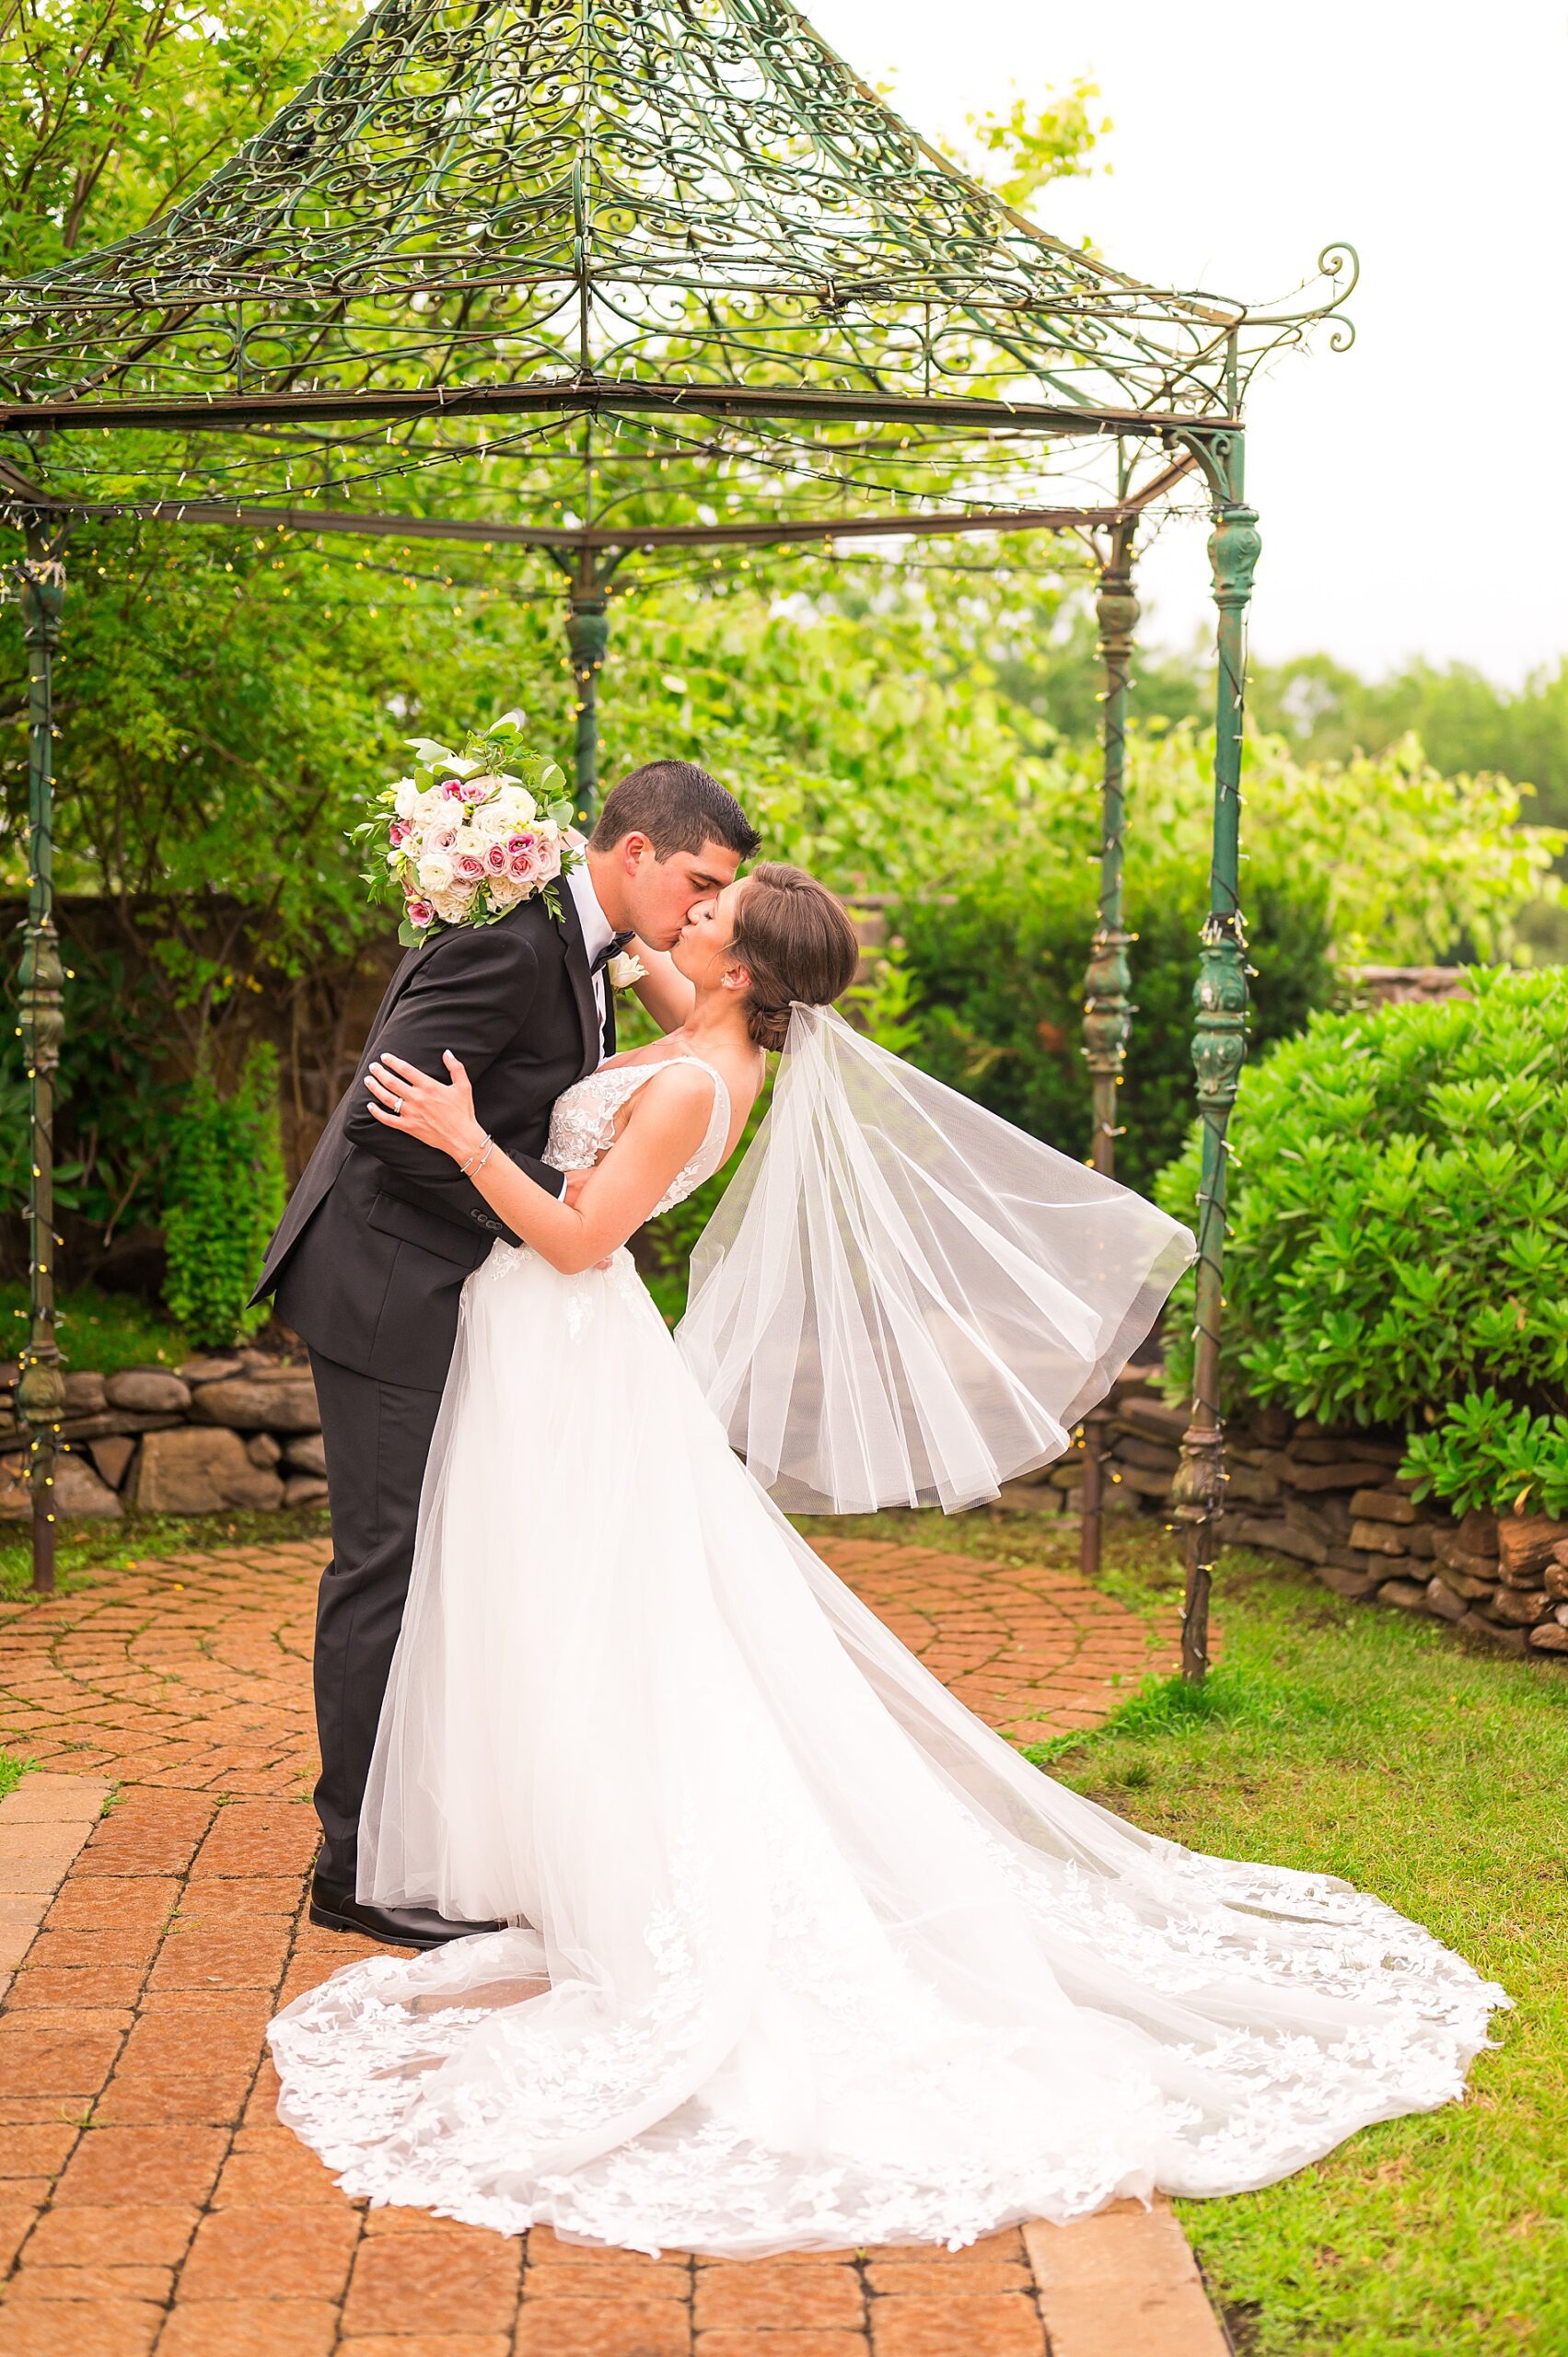 Romantic Wedding portraits photographed by NH Wedding photographer Allison Clarke Photography